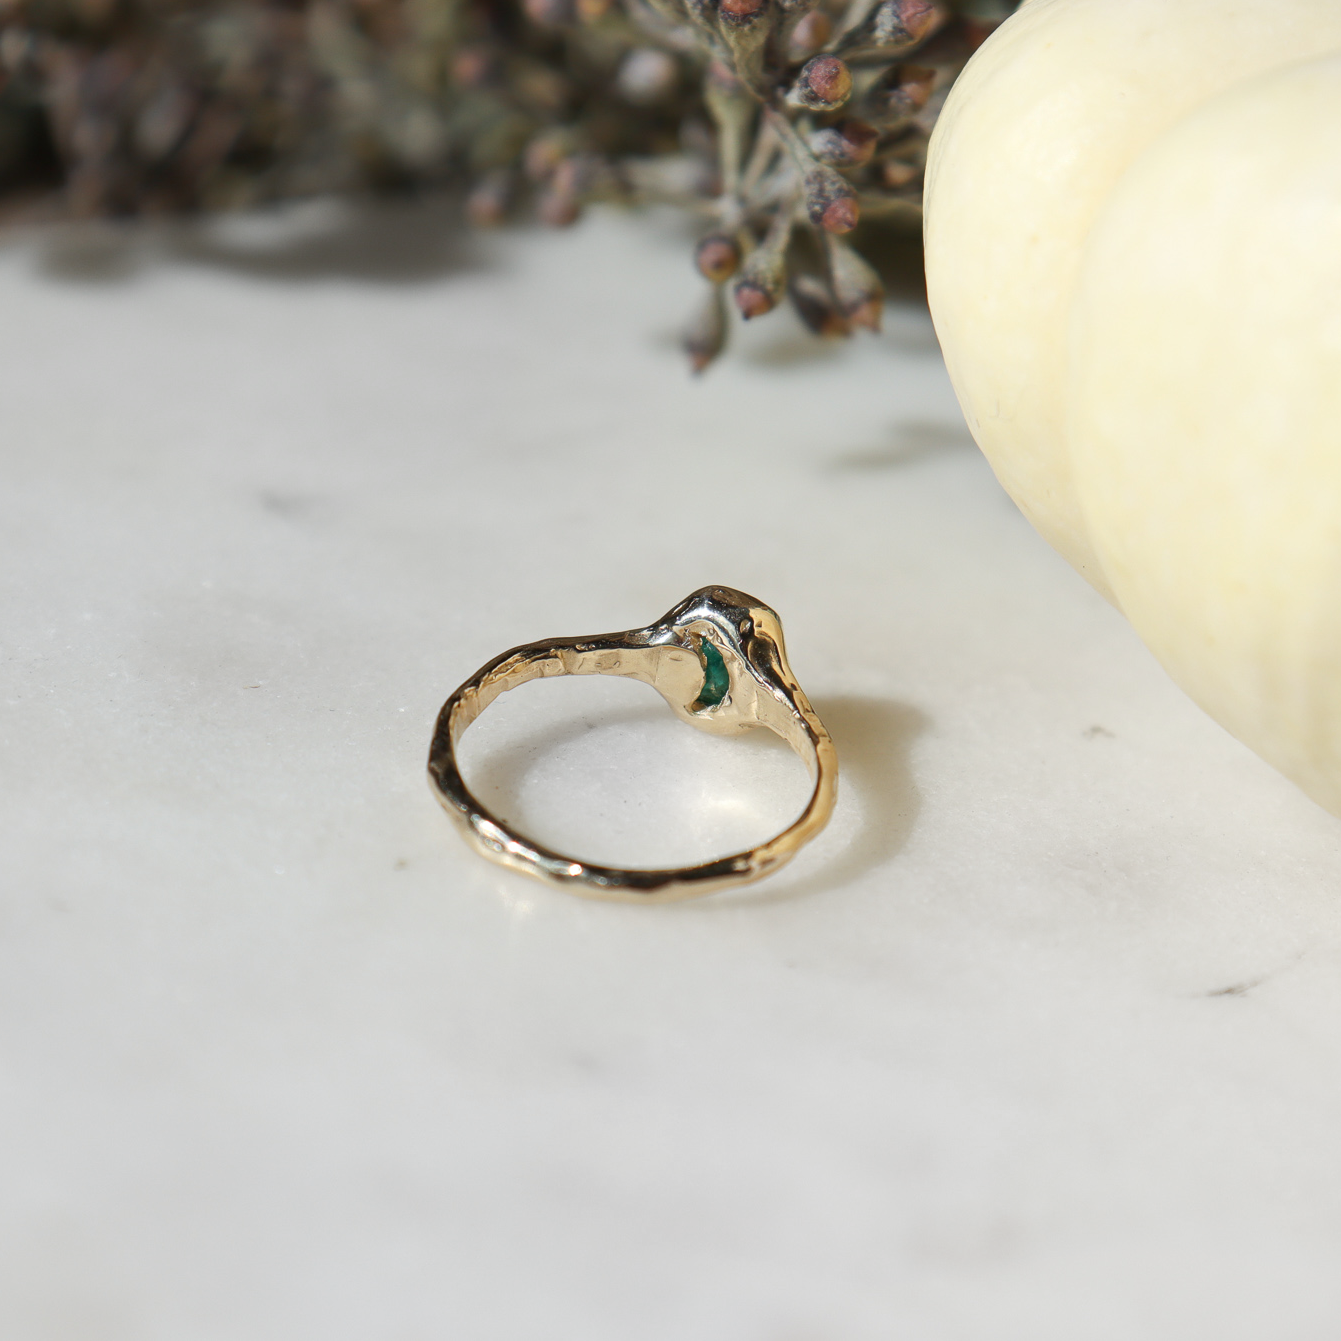 Back view of an emerald cut emerald that is bezel set in 14k gold with a small moon cut out  of the back.